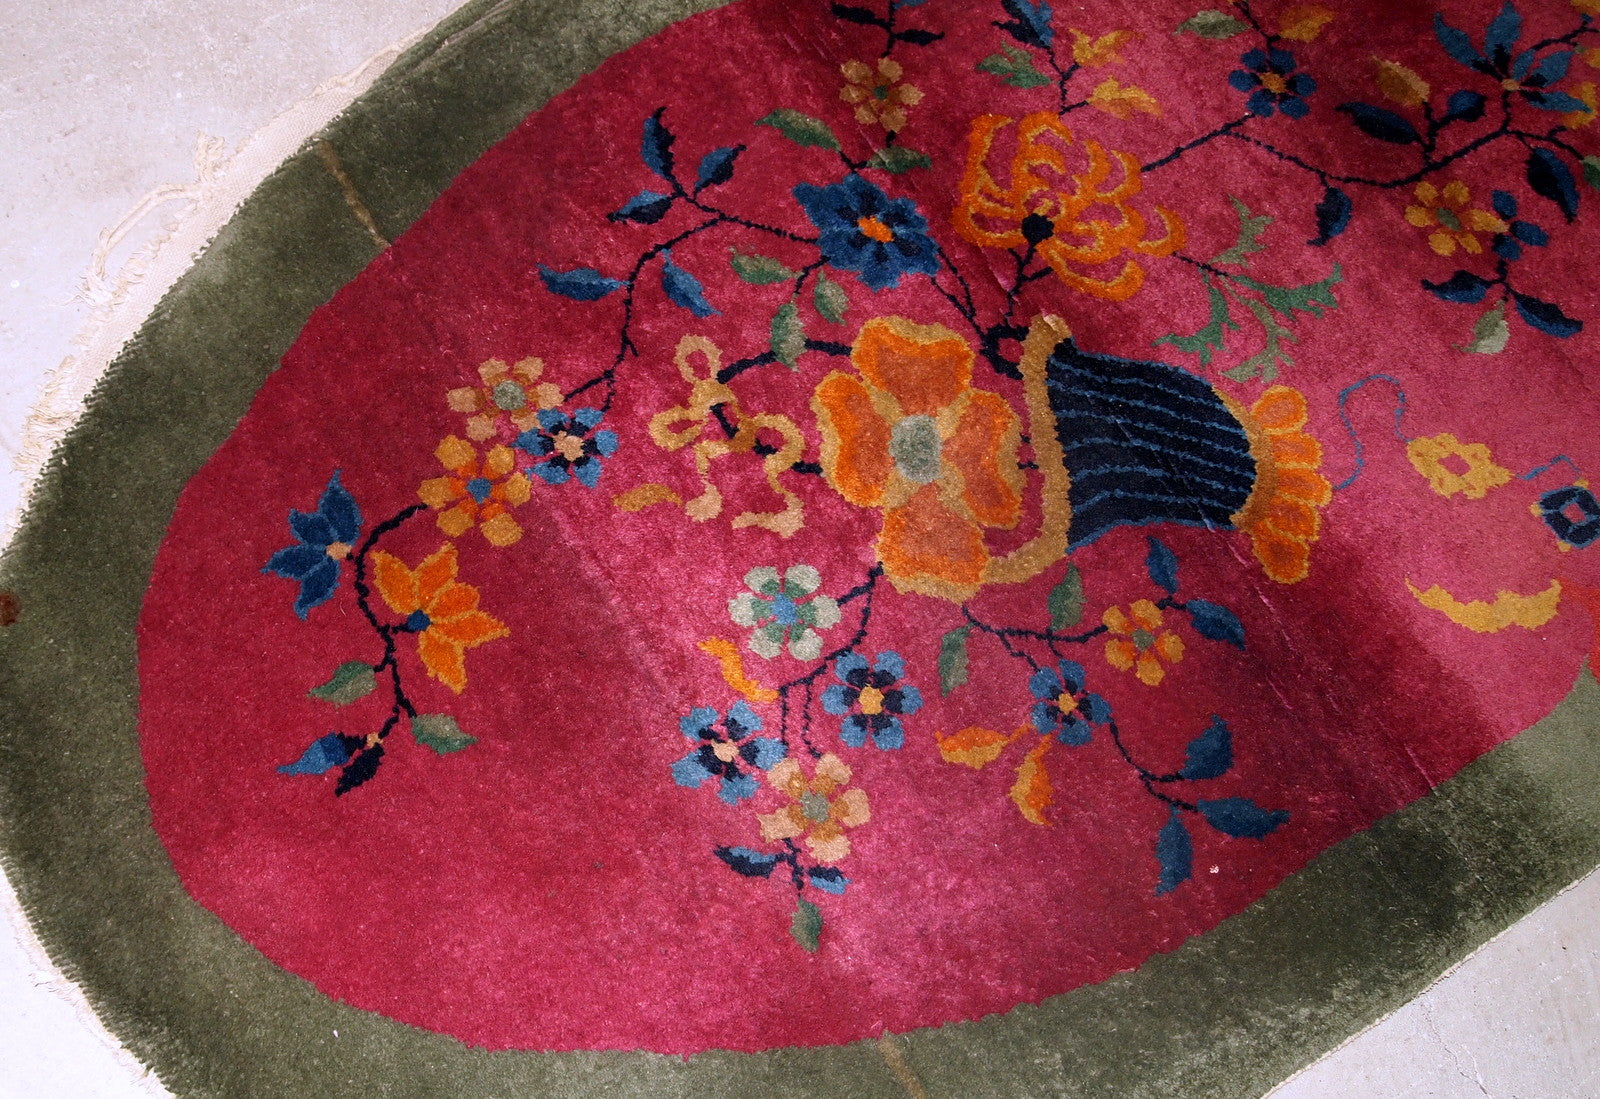 Handmade antique oval decorative rug from China in original good condition. The rug is in fuchsia and green shades.